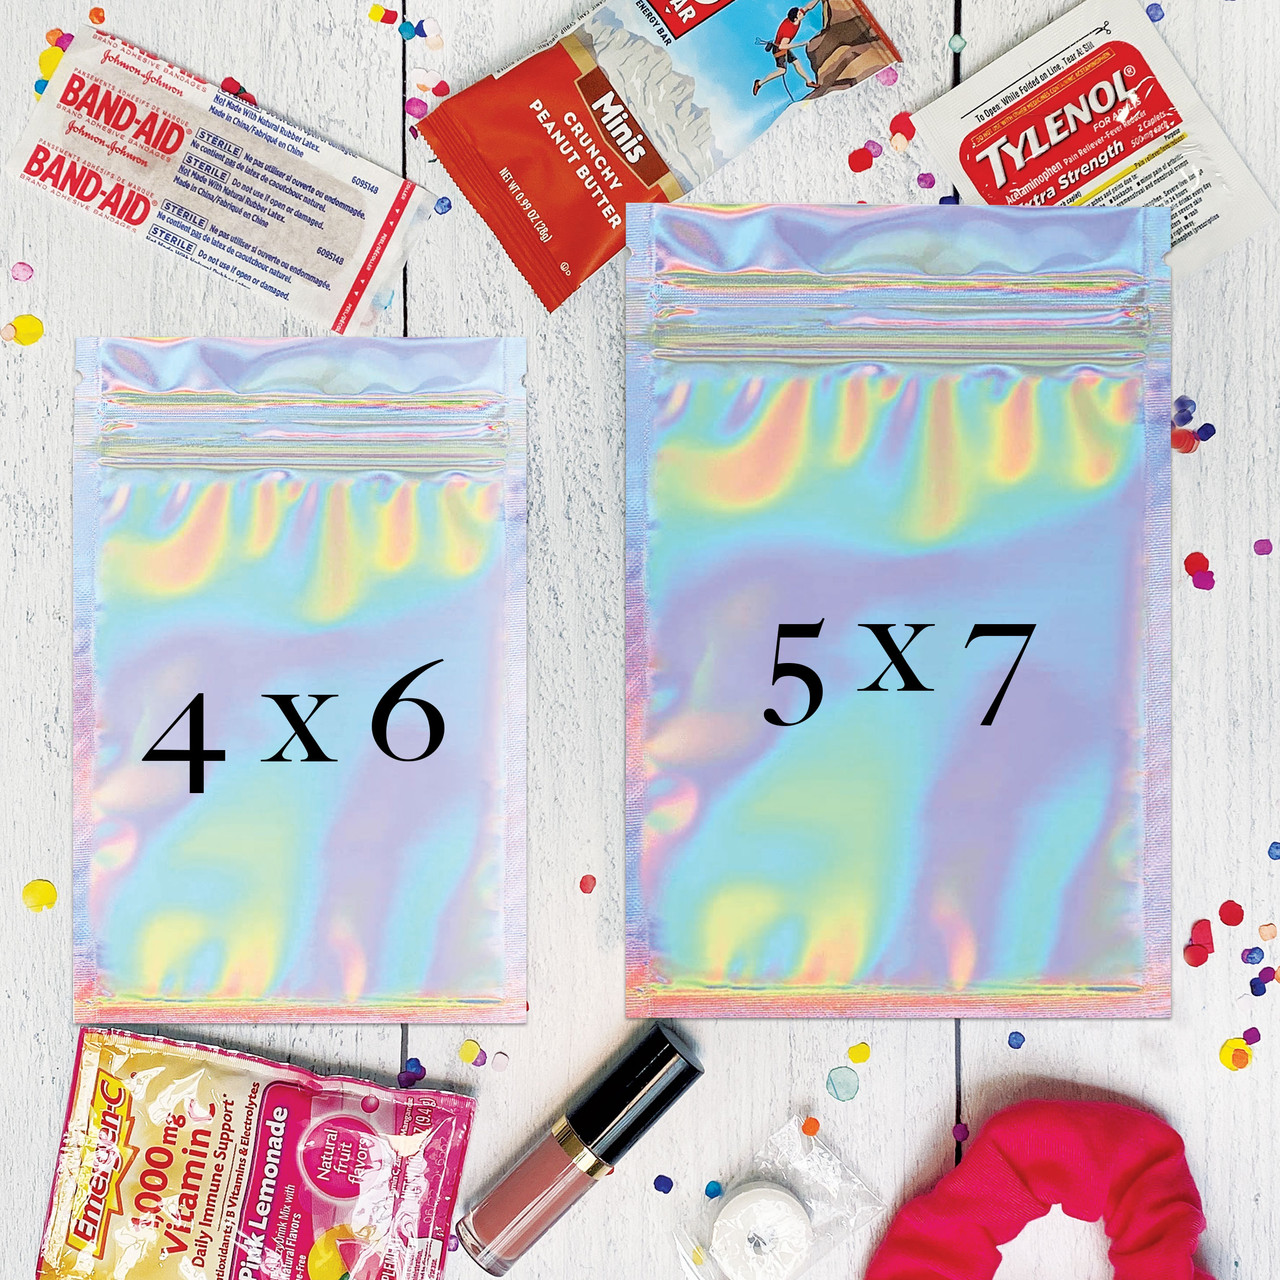 Happy Holidaze Holographic Christmas Favor Bags Your store is not eligible  for the new catalog experience Some of your products, categories and/or  options are not compatible. Learn how to prepare your store